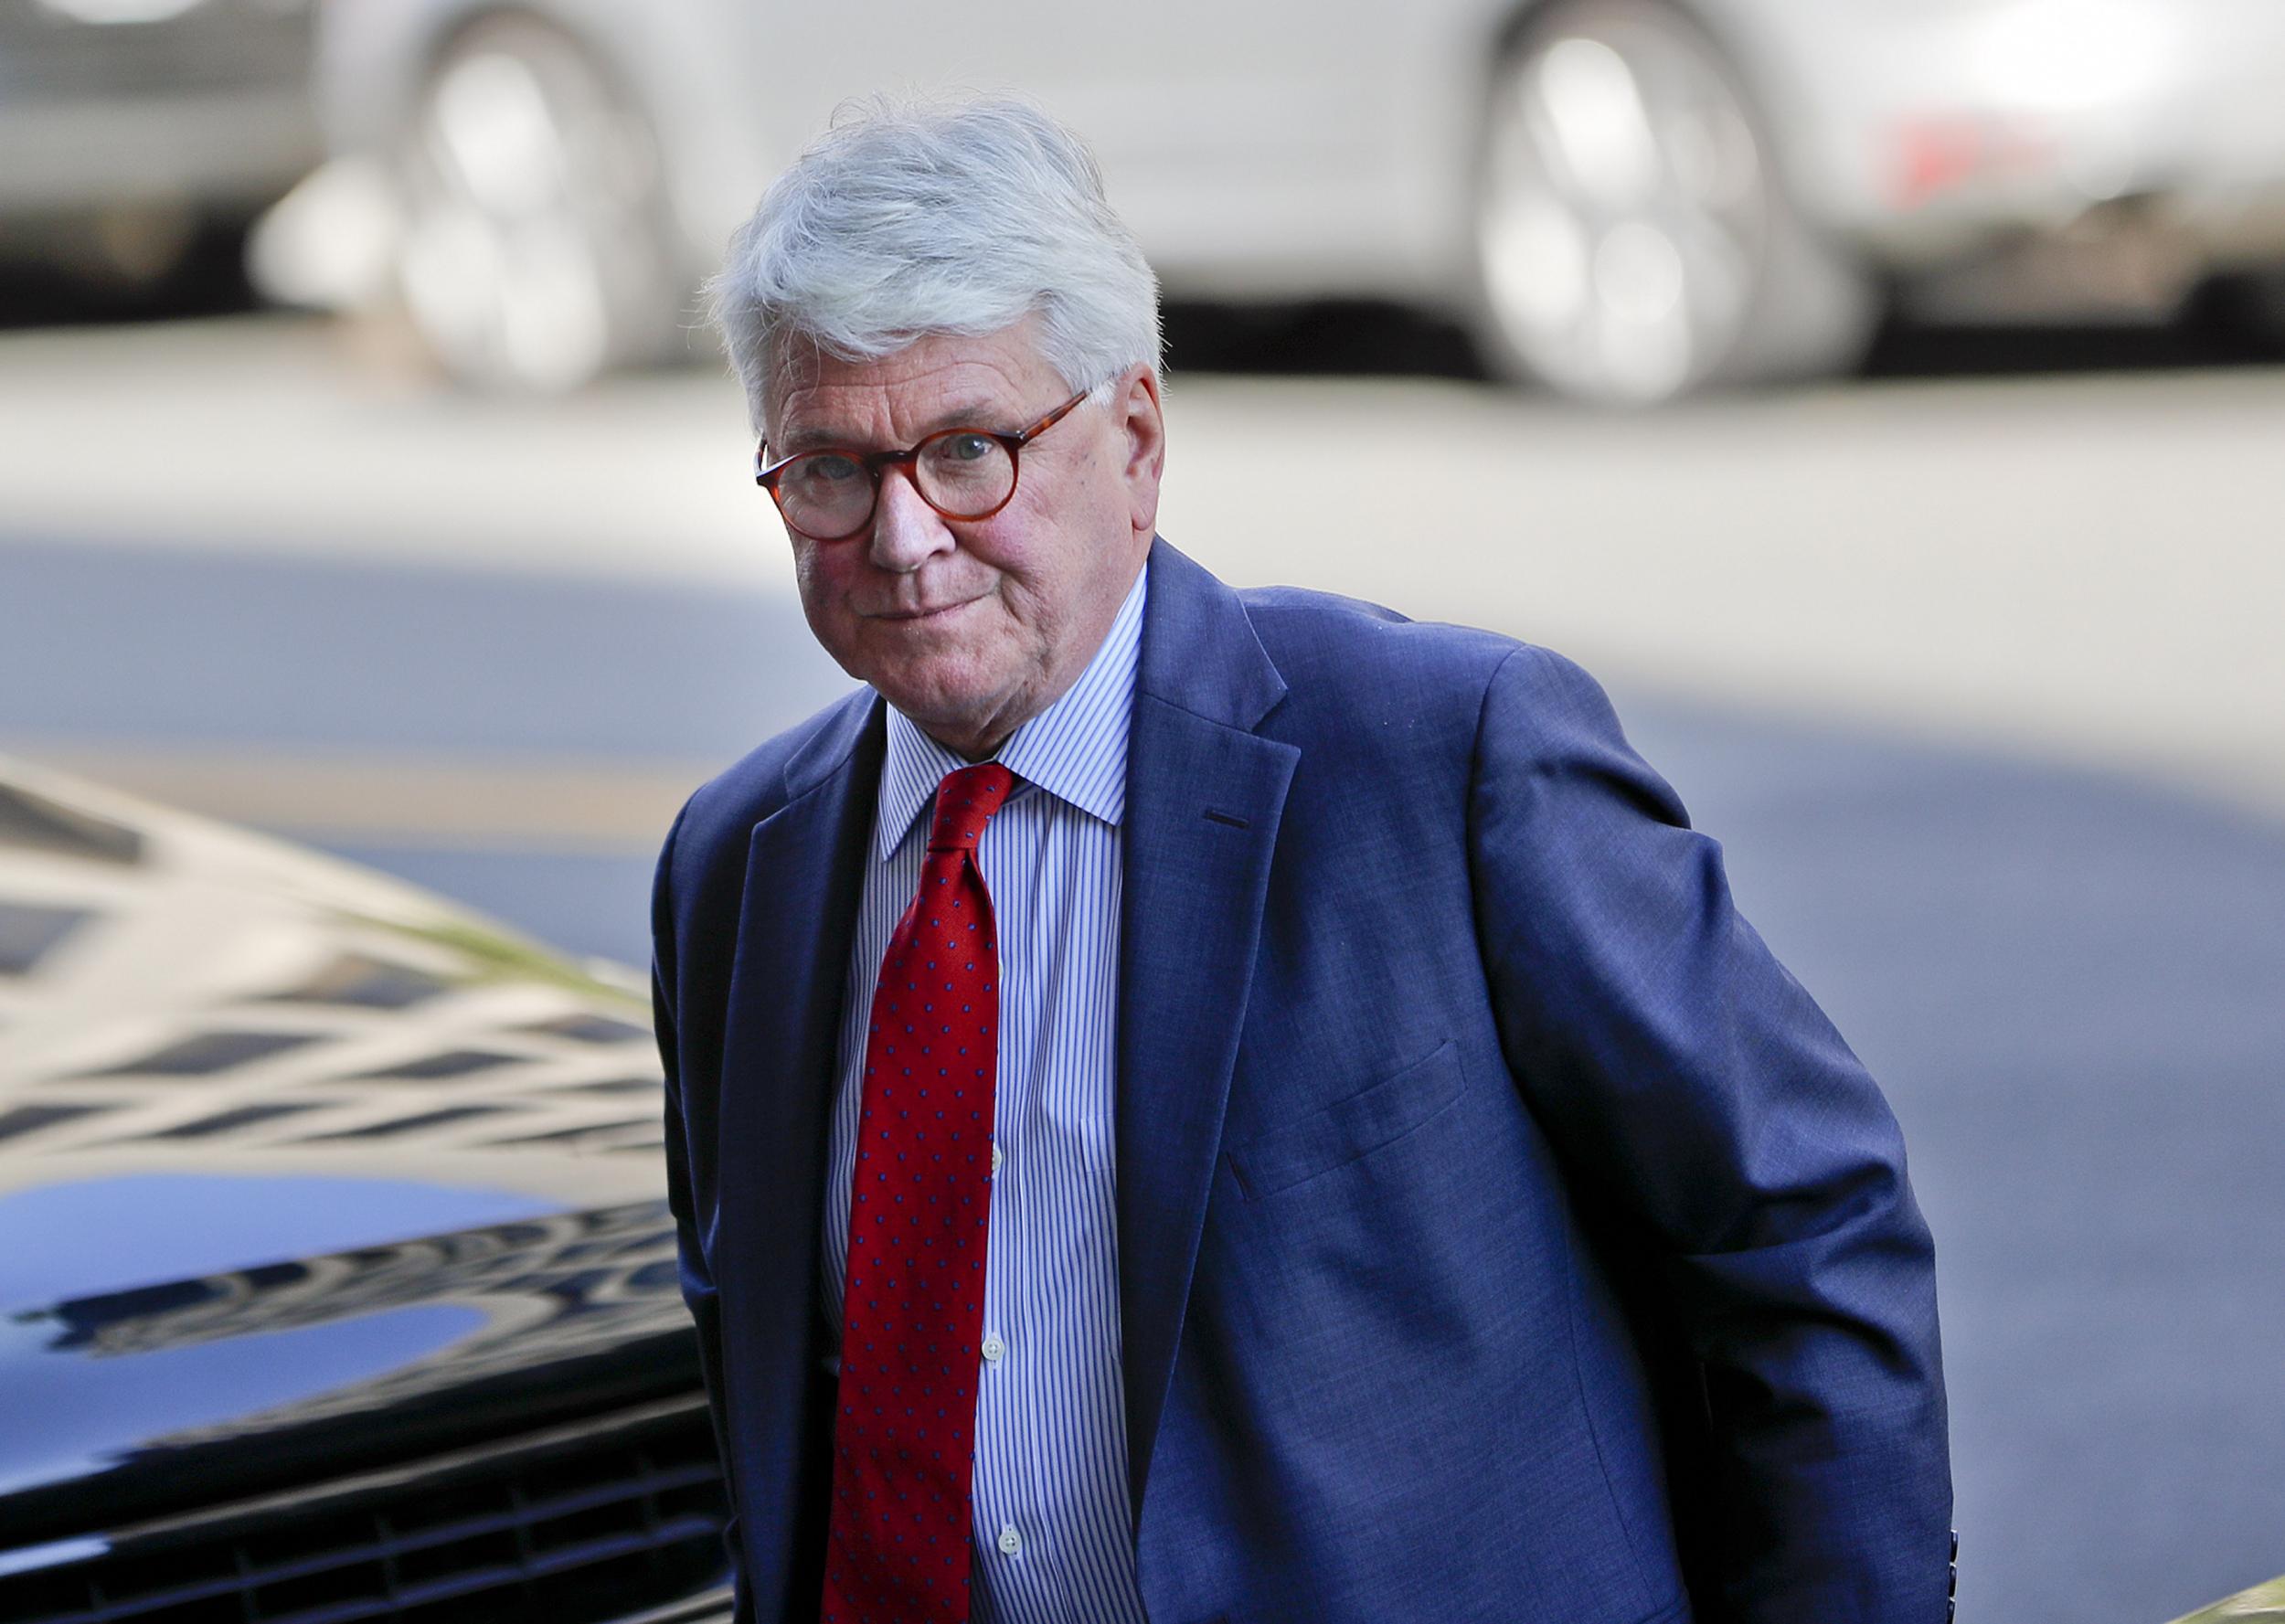 Barack Obama's former White House counsel Gregory Craig has been indicted